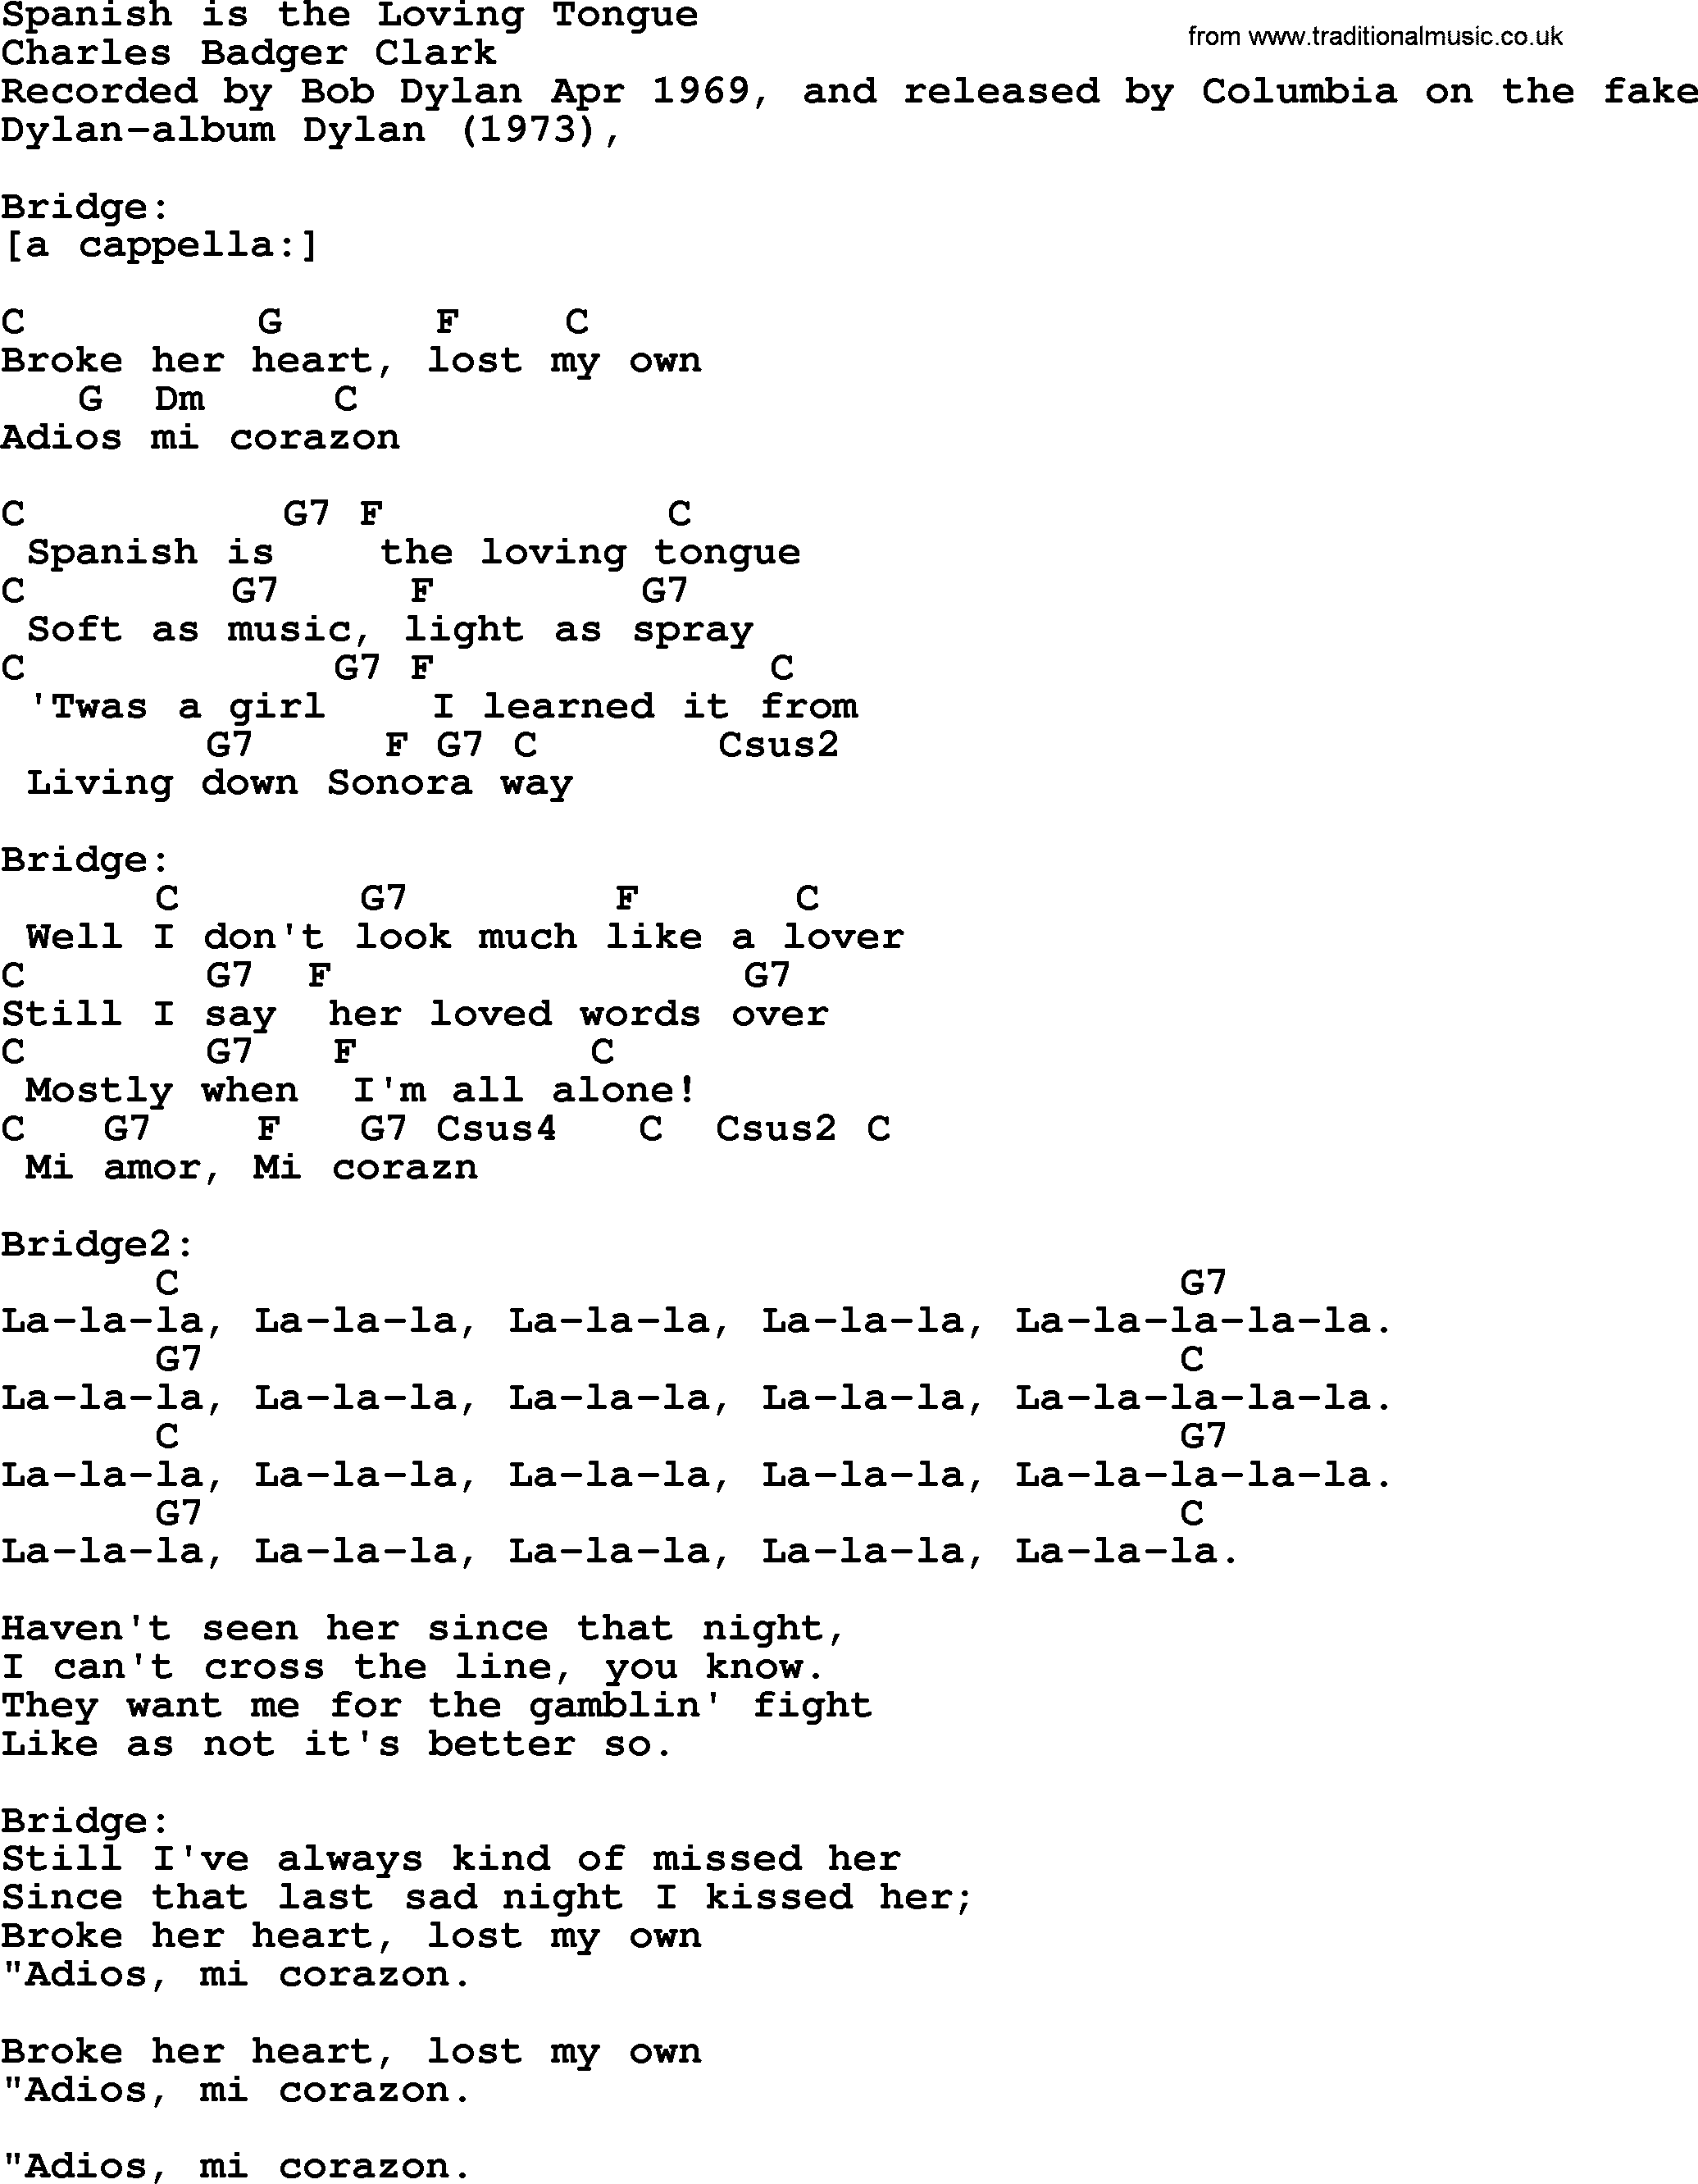 Bob Dylan song, lyrics with chords - Spanish is the Loving Tongue